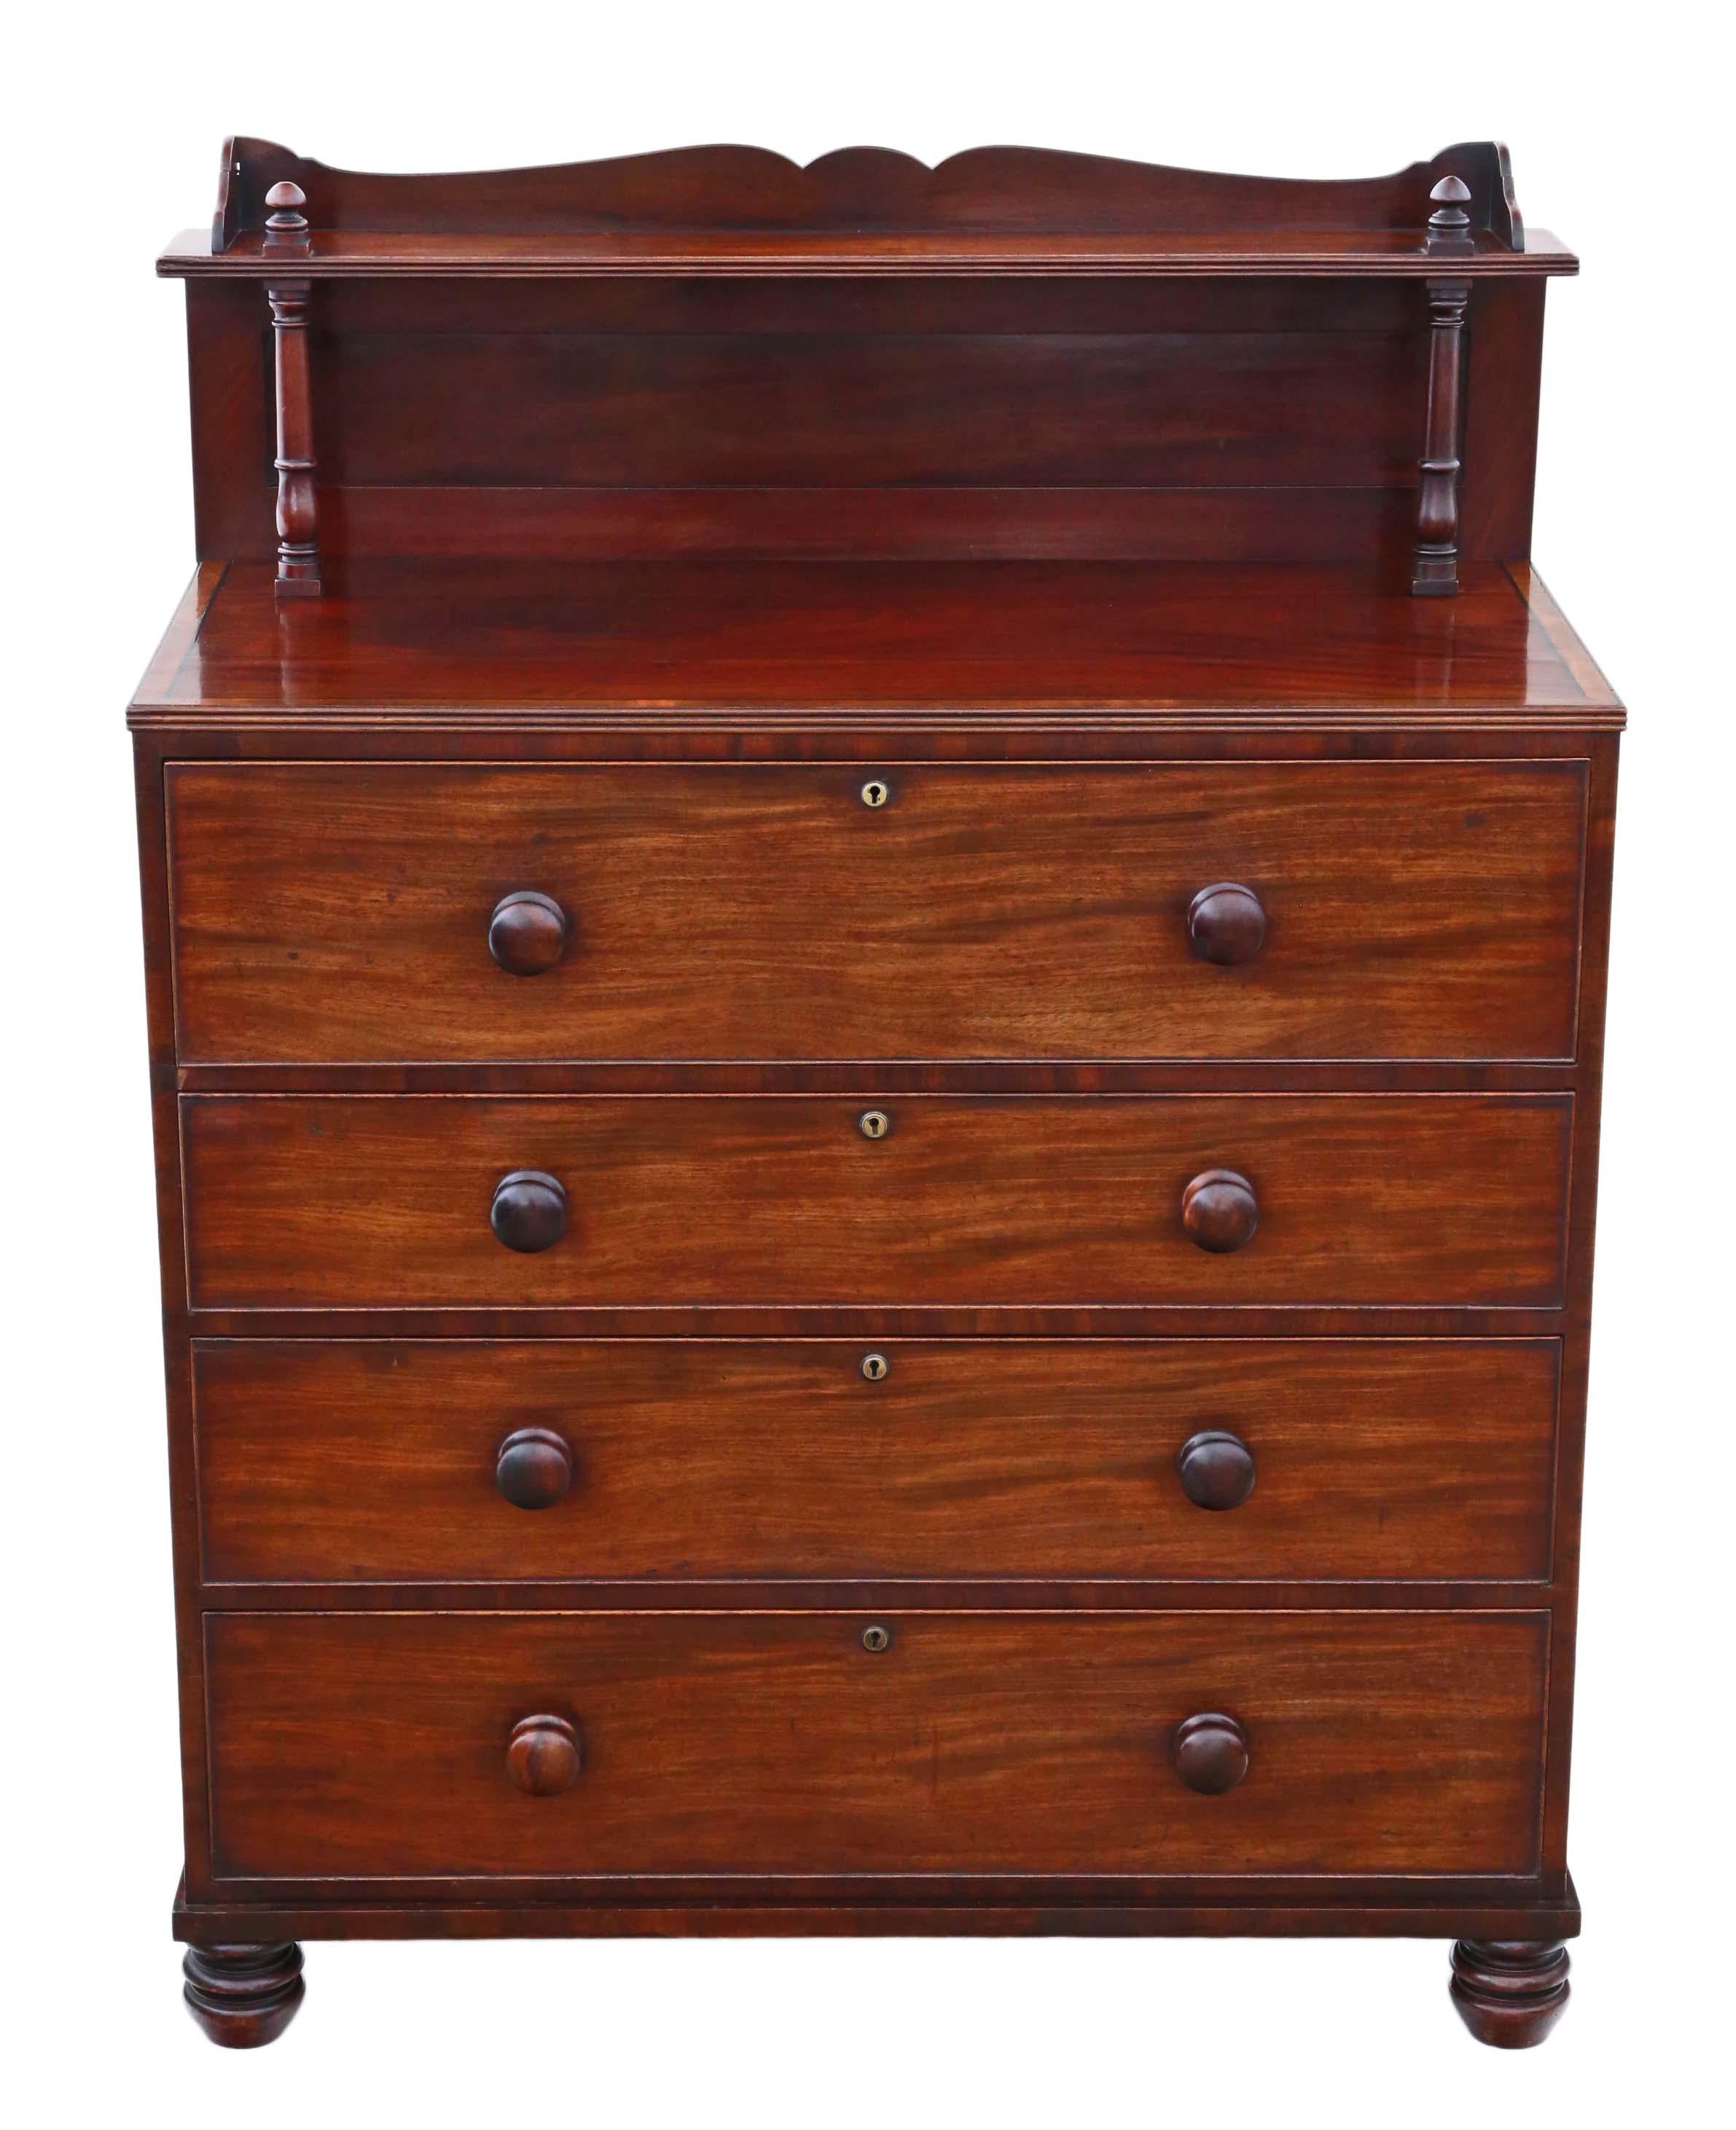 Antique Regency / William IV mahogany secretaire writing desk and chest of drawers, circa 1825-1835.
A lovely item, that is full of age, charm and character.
Solid with no loose joints and the drawers slide freely.
Great age charm and